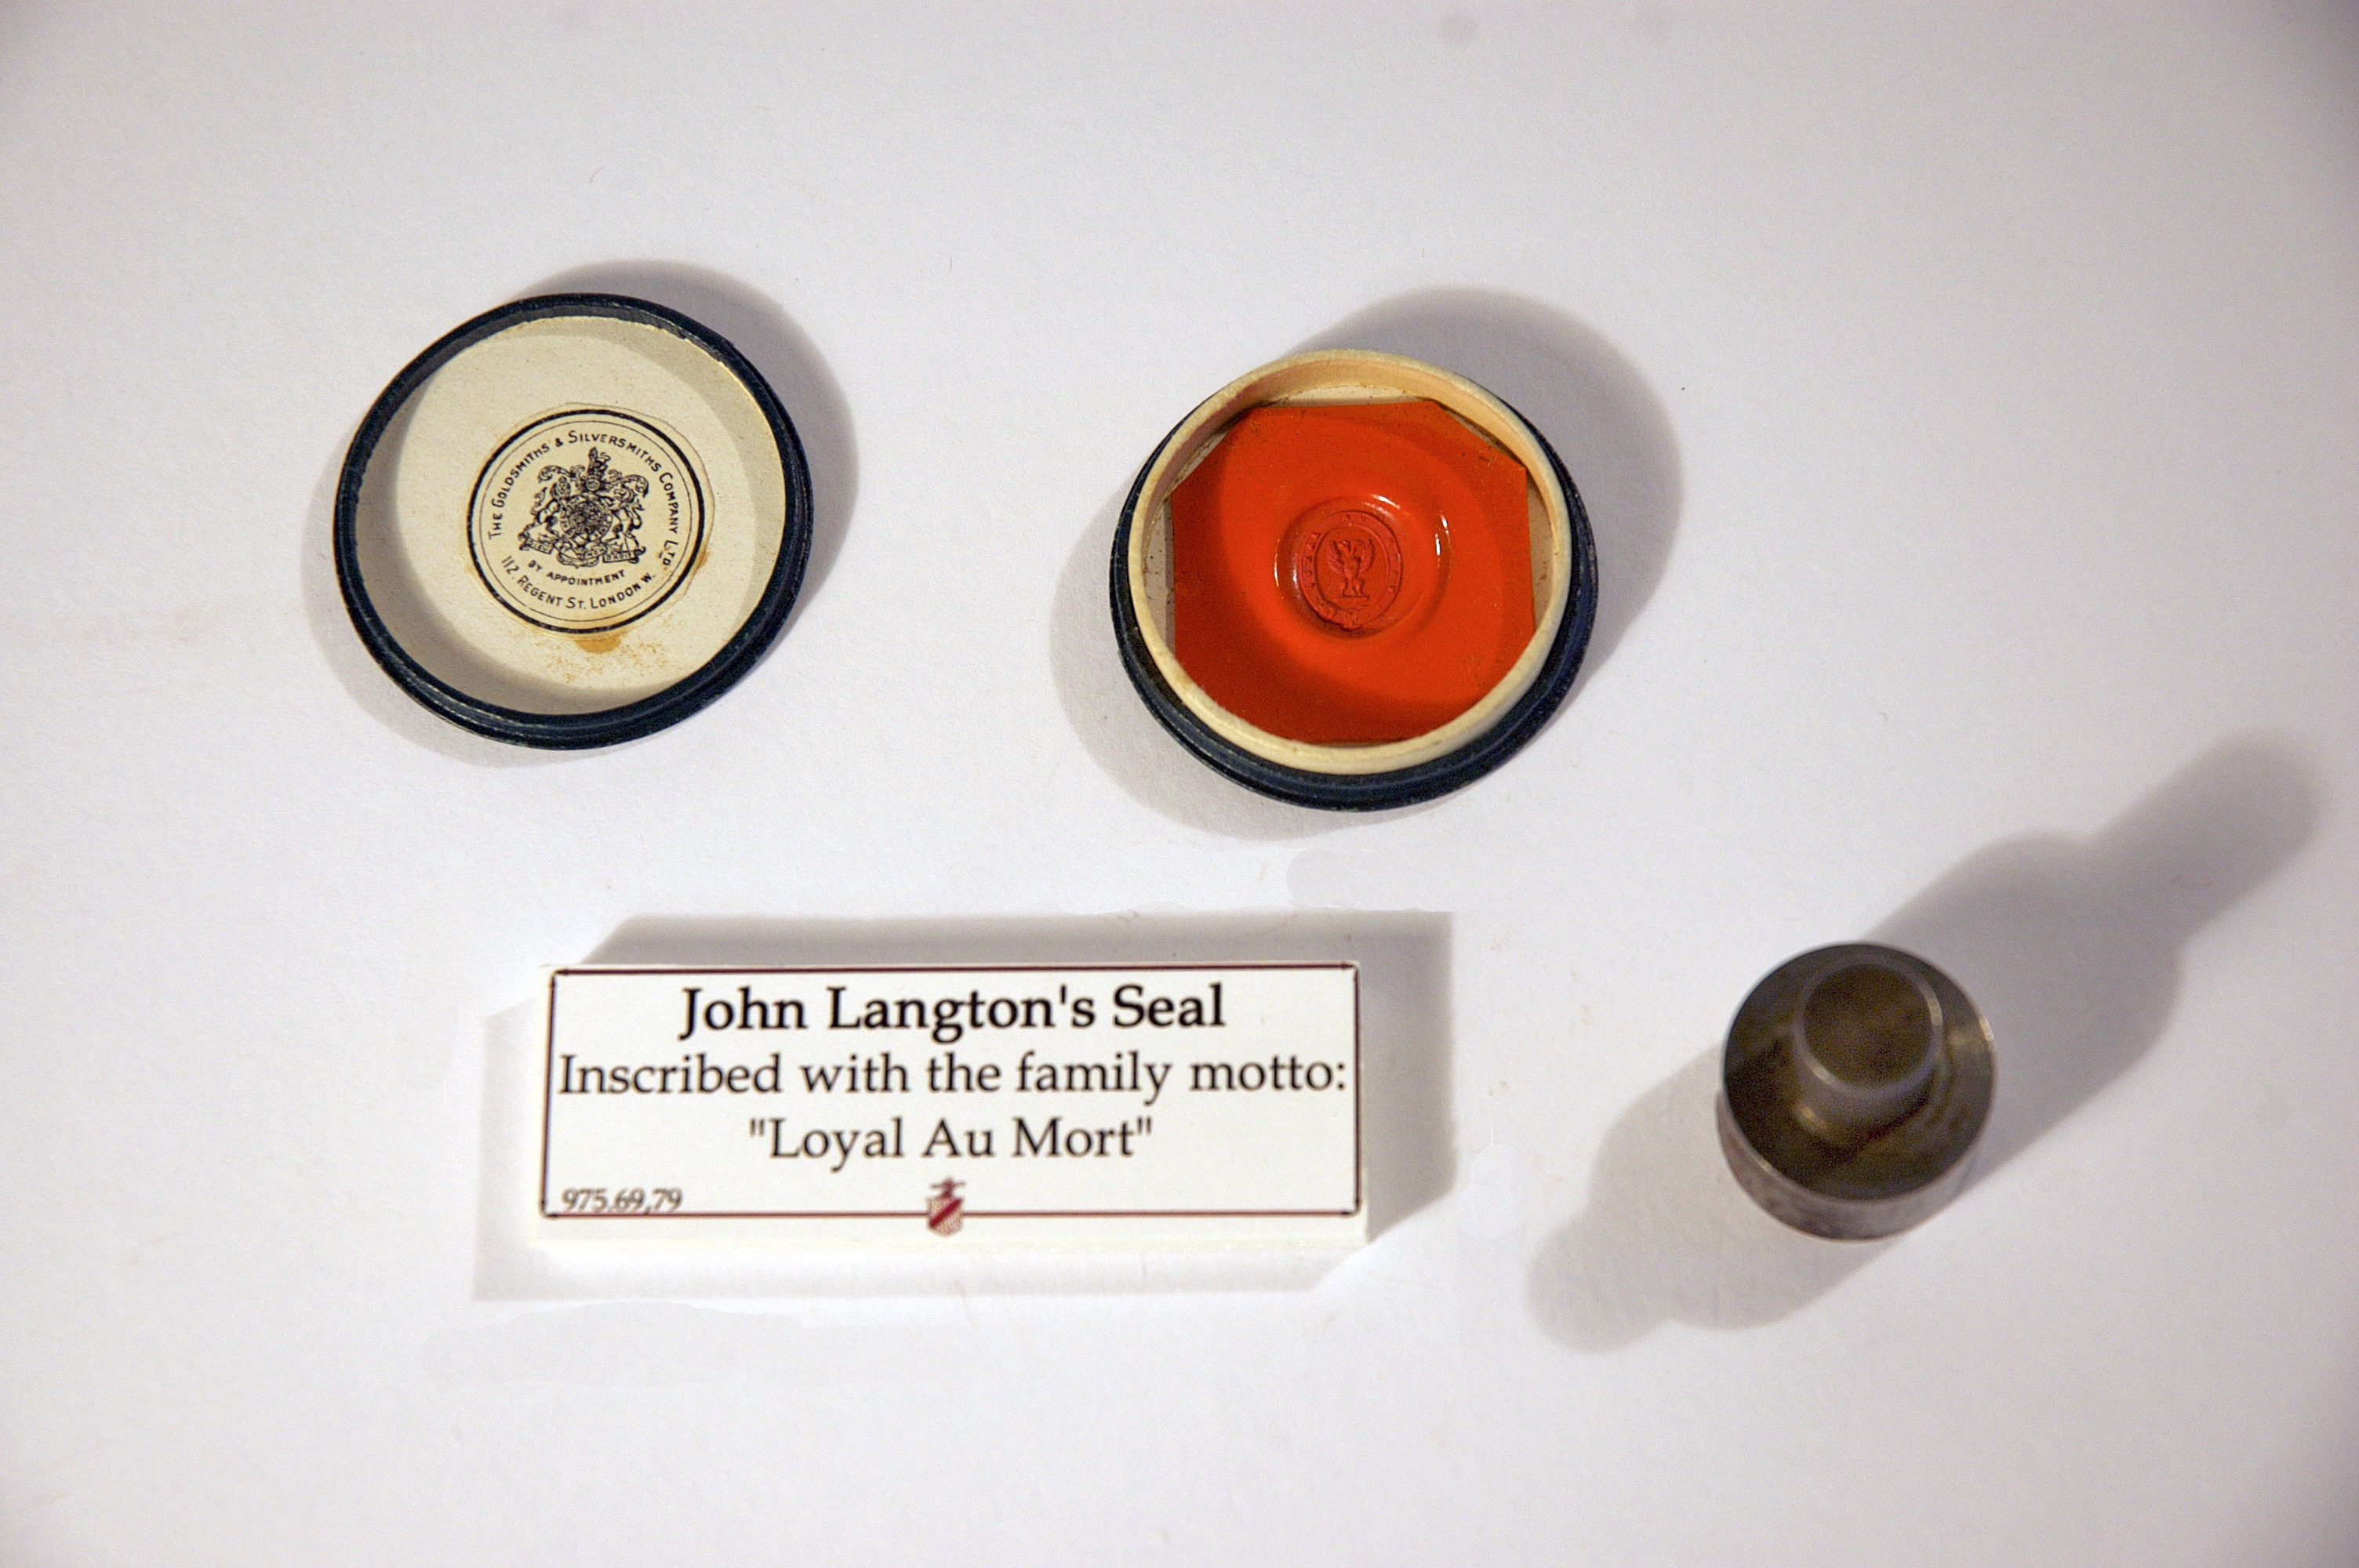 Measuring just under 2 inches in diameter, picture shows the red seal of John Langton, inscribed with family motto "Loyal Au Mort" The lid to the seal box is to the left of the seal. To the right of the seal, is ink which would of been applied.